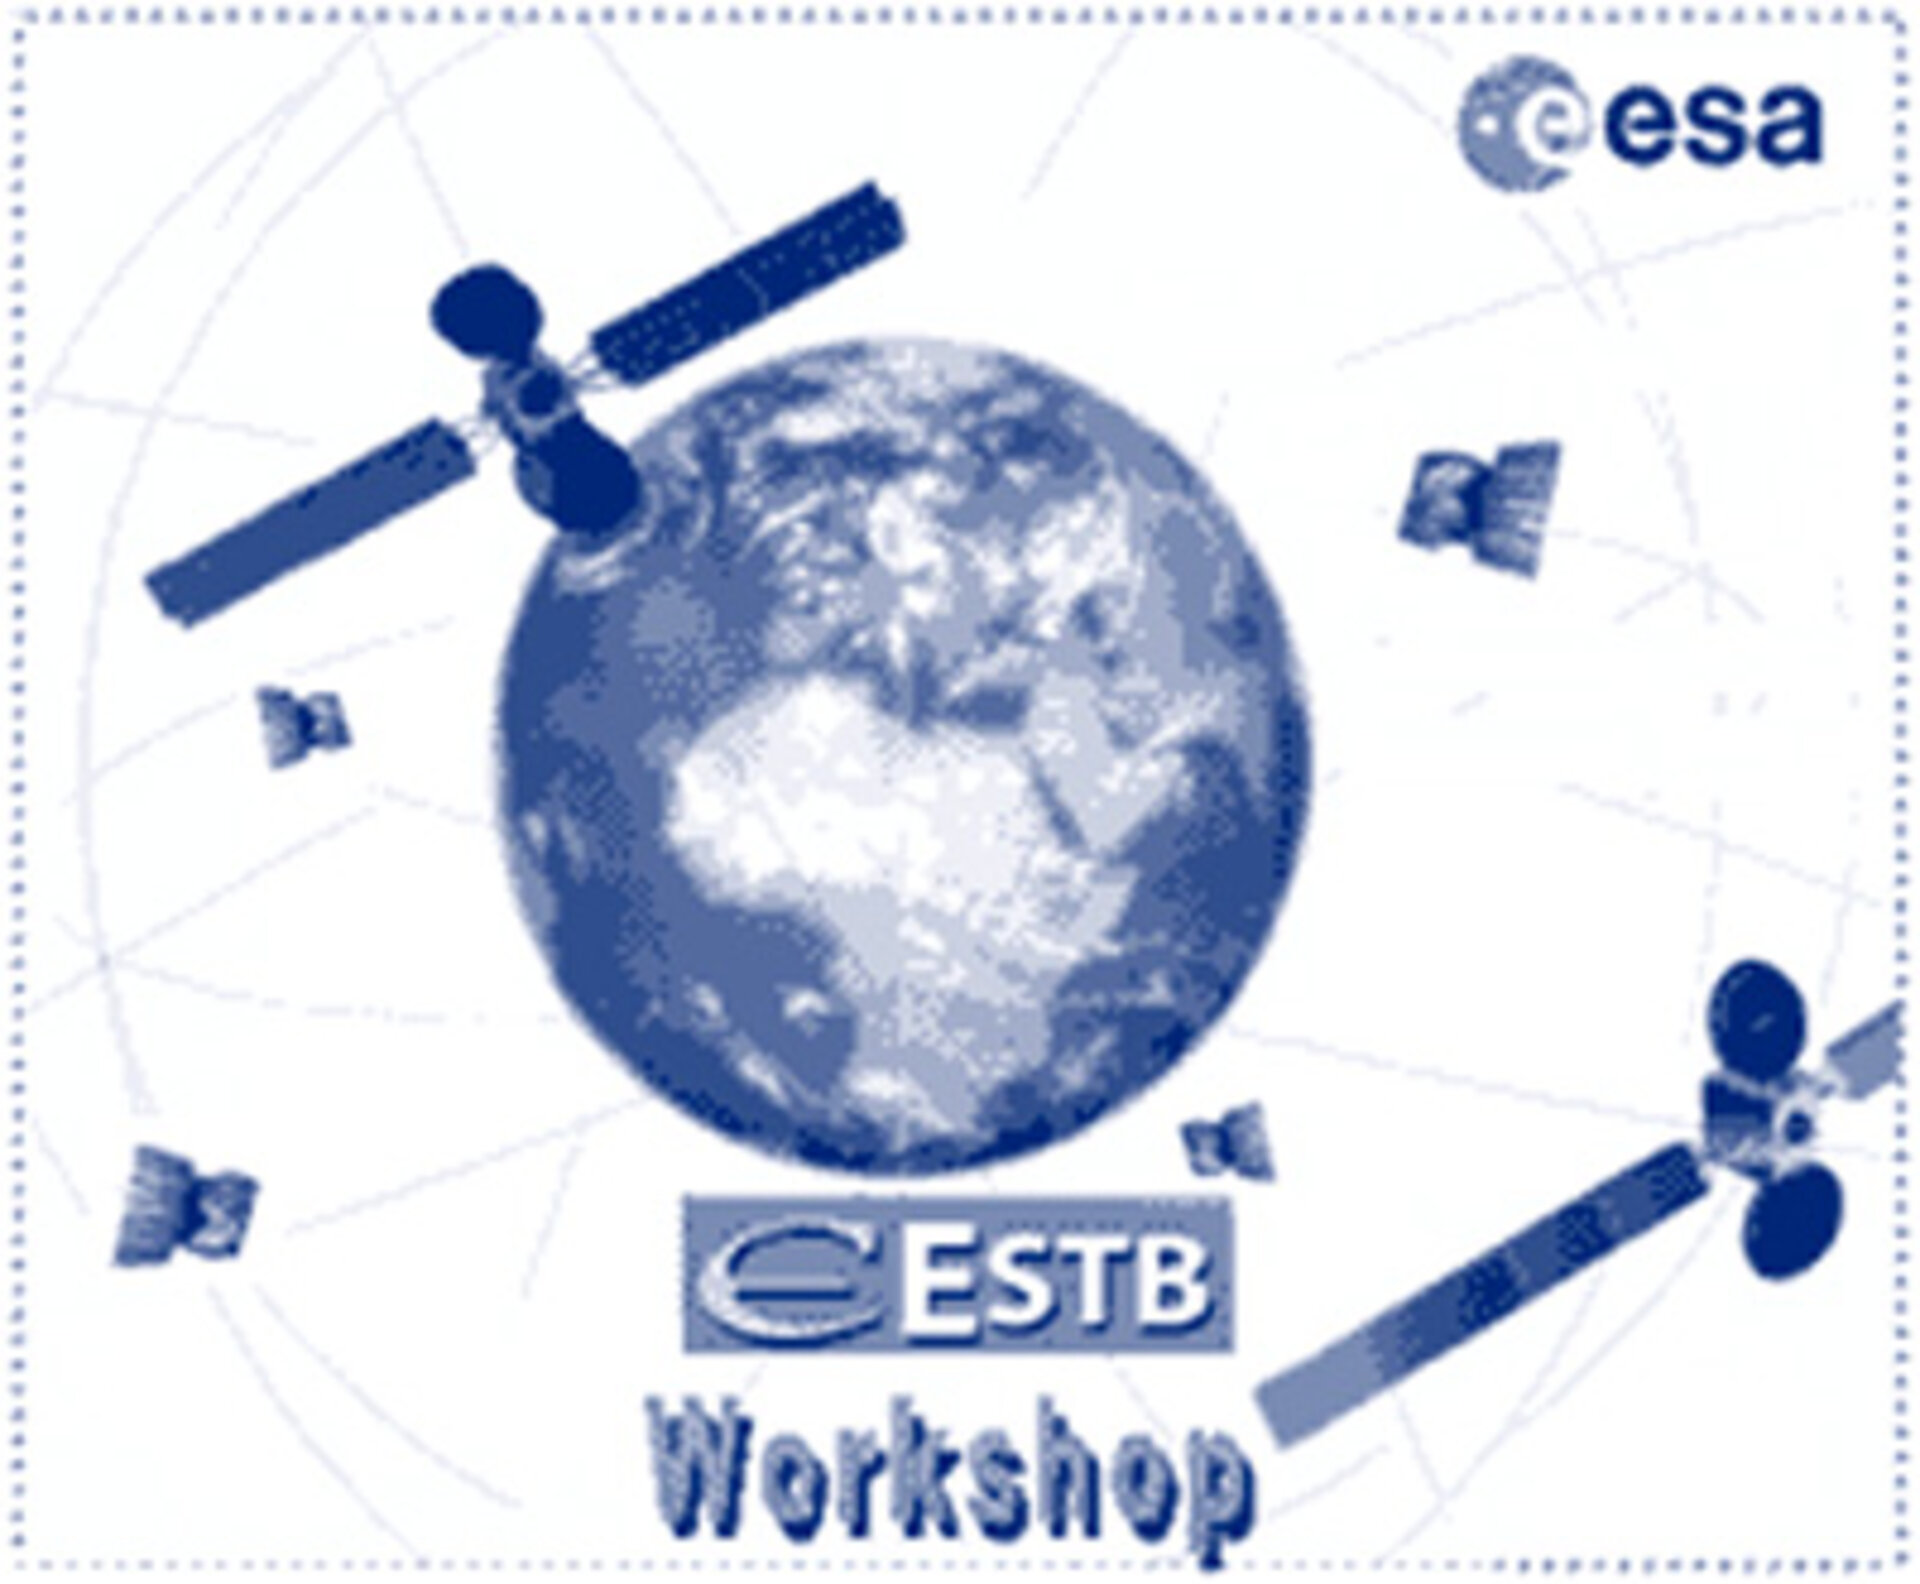 Logo of ESTB (the already operational test bed of EGNOS)